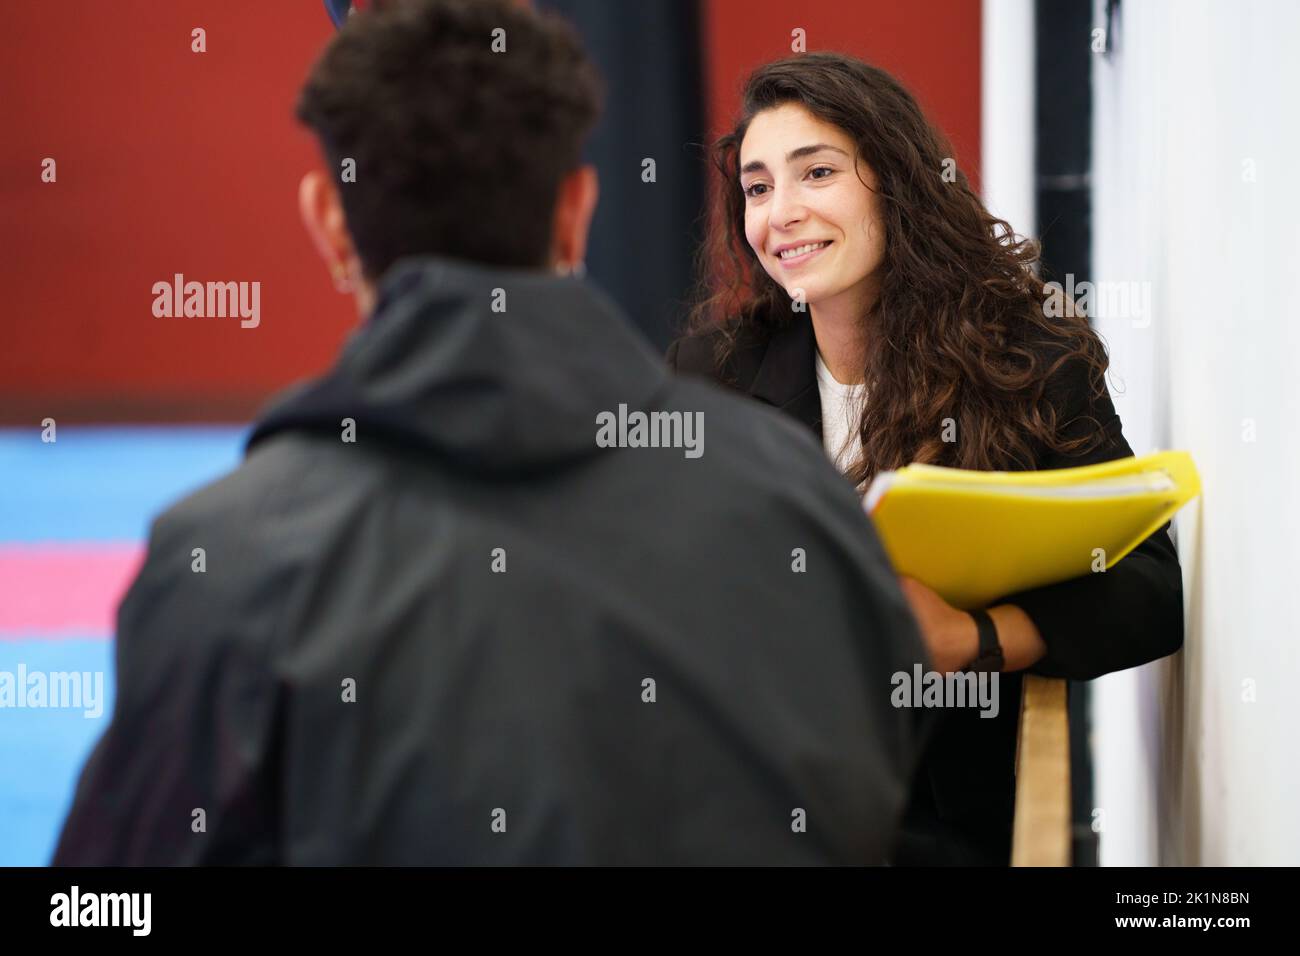 Friendly female counselor listening to sportsman in gym Stock Photo